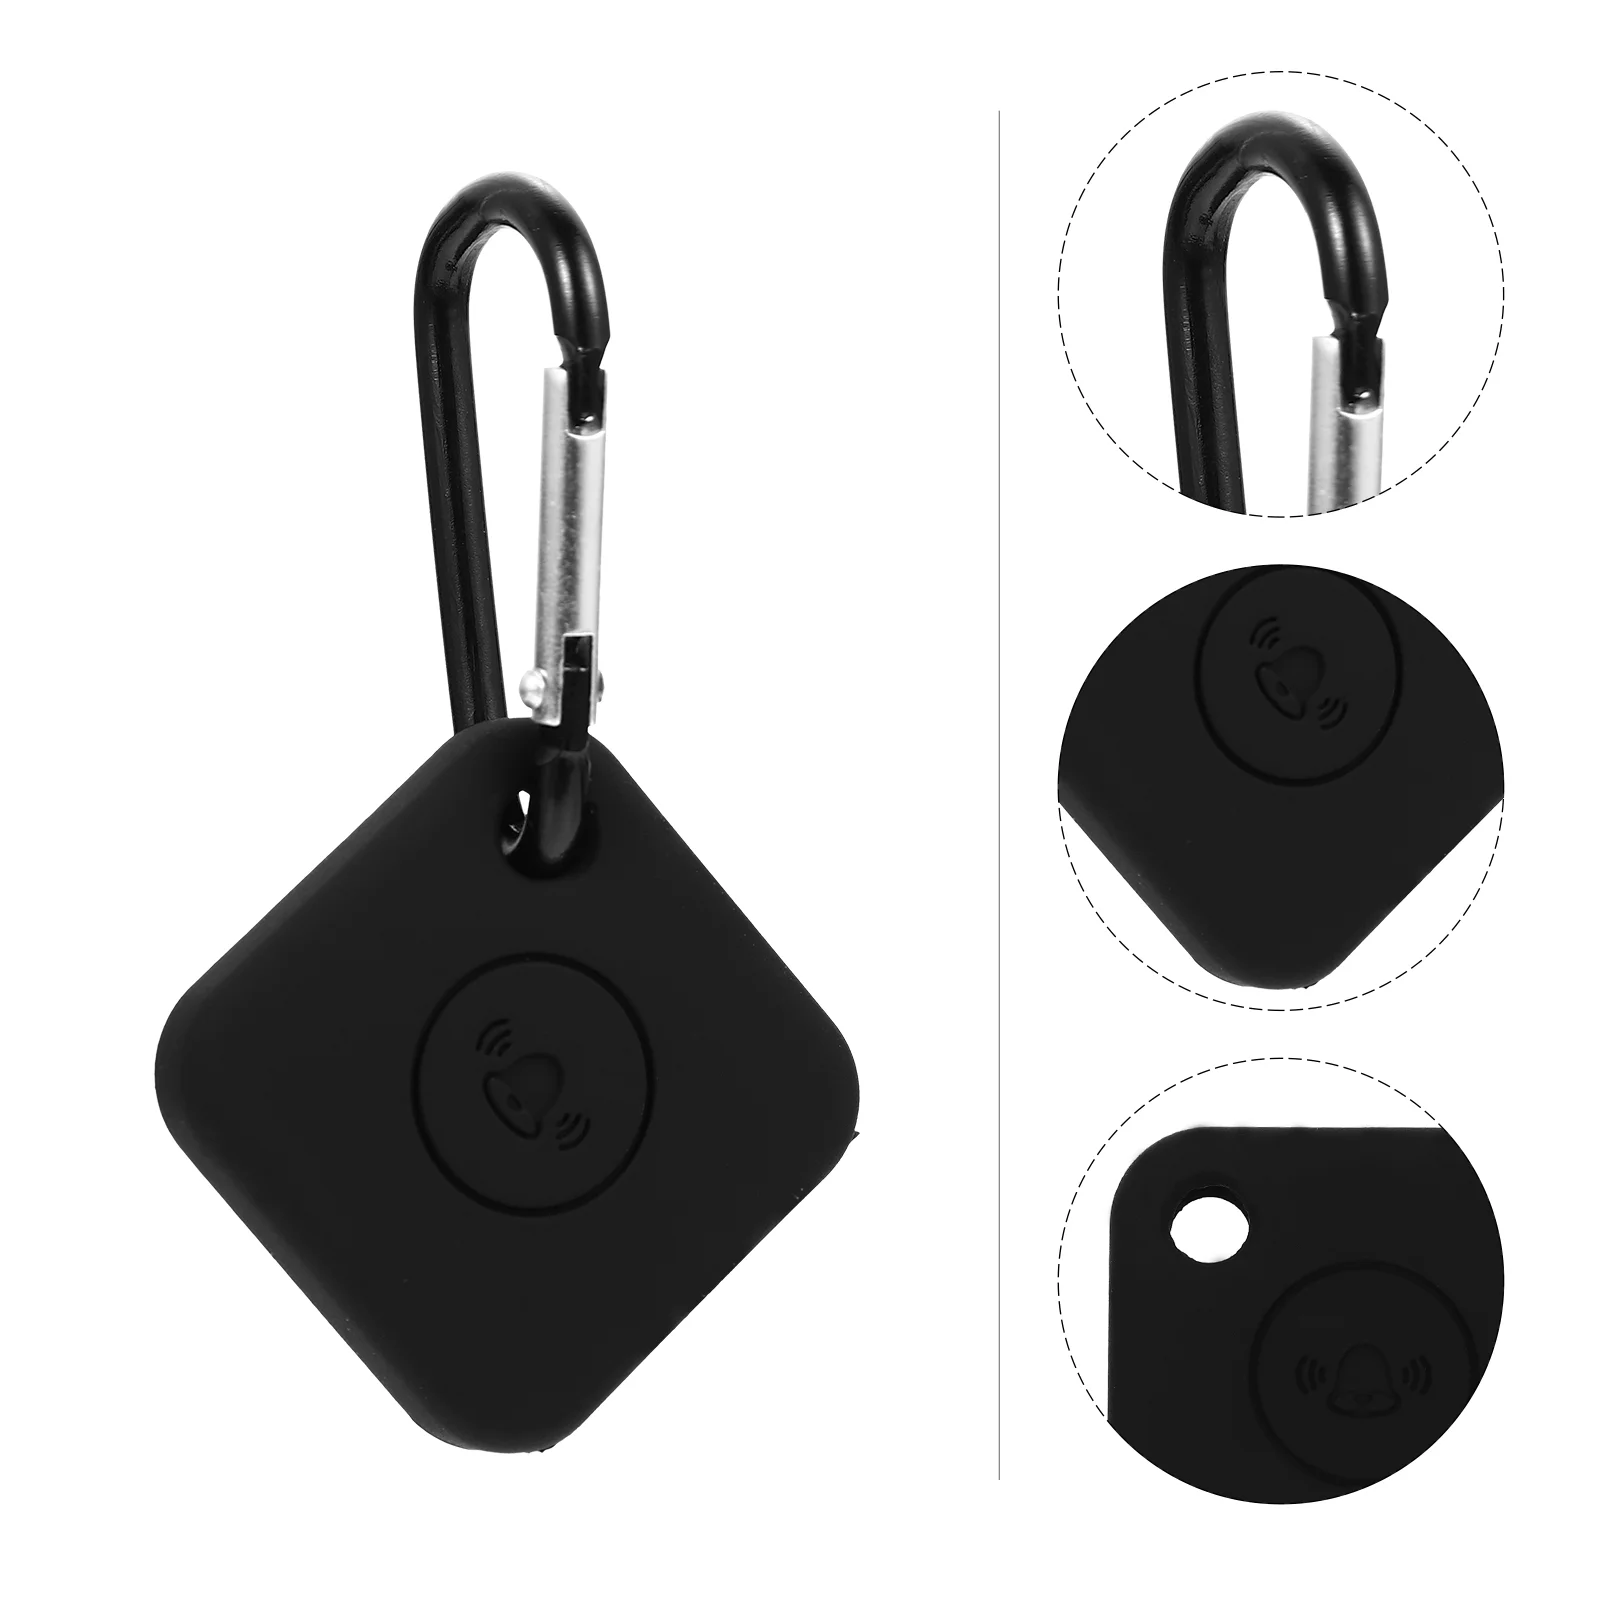 

Tracker Case Tracer Sleeve Smart Protective Silicone Key Fob Chain Cover Anti-Scratch Silica Gel Travel Suitcase Organiser Bags